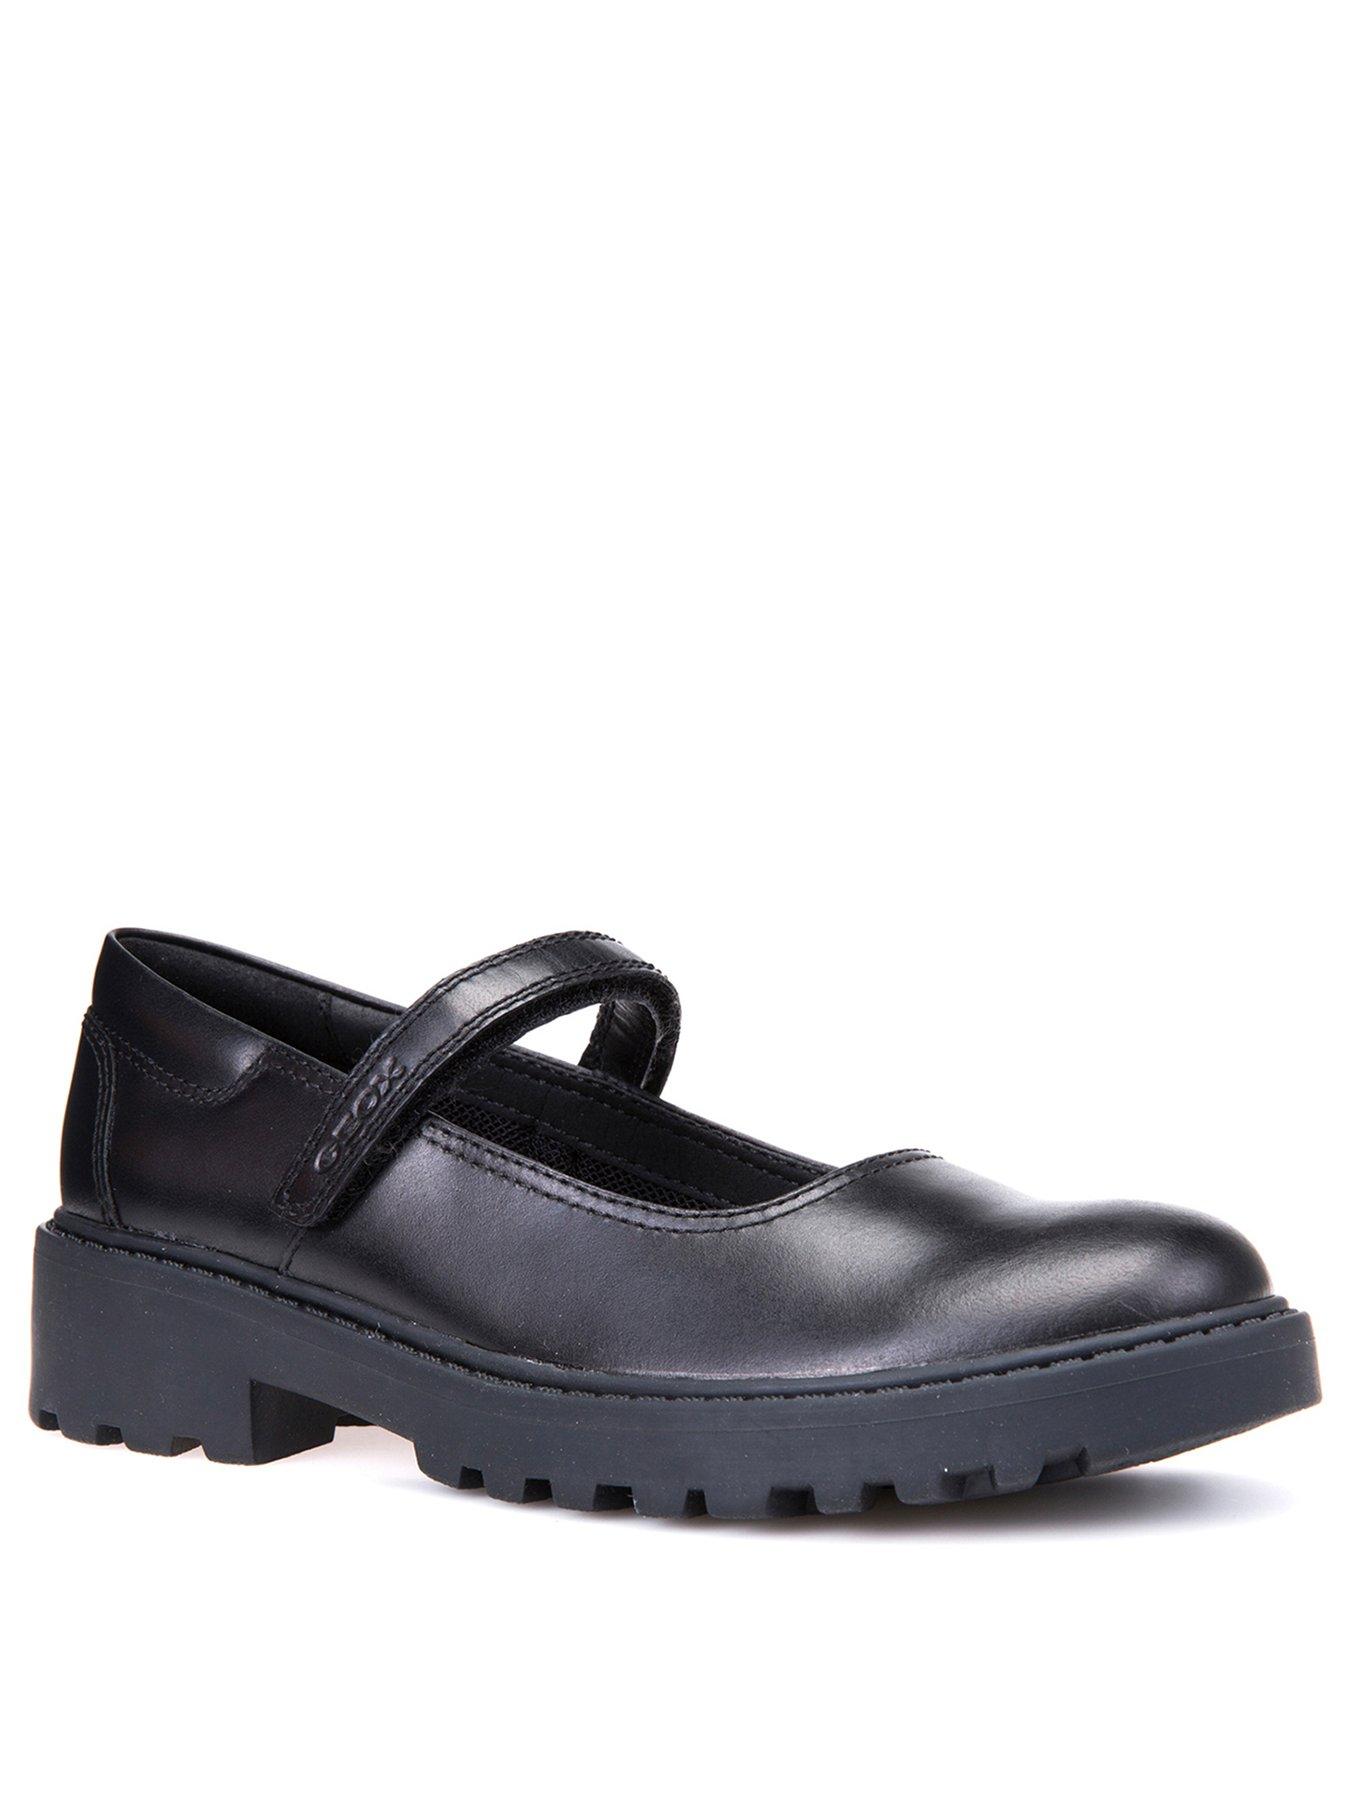  Casey Leather Mary Jane School Shoes - Black